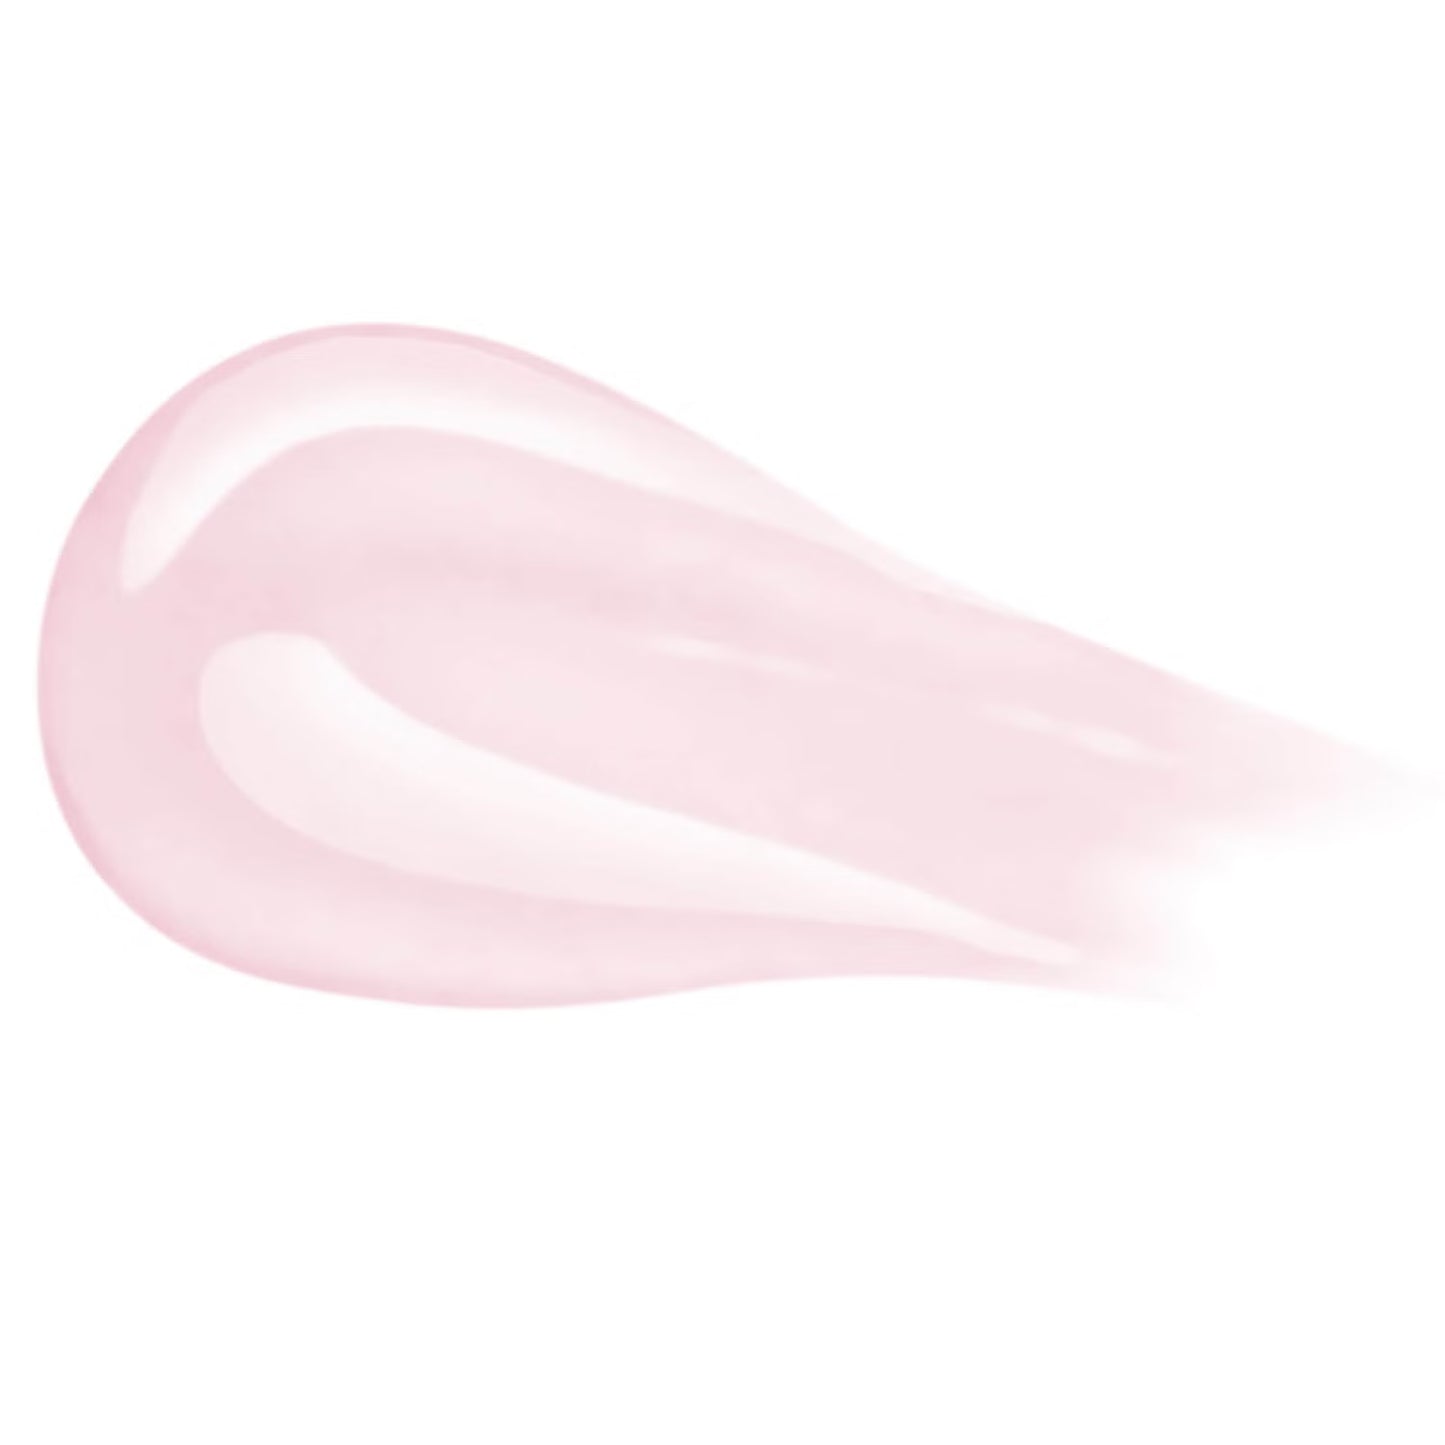 Too Faced Lip Injection Extreme Lip Plumper 4g - Bubblegum Yum